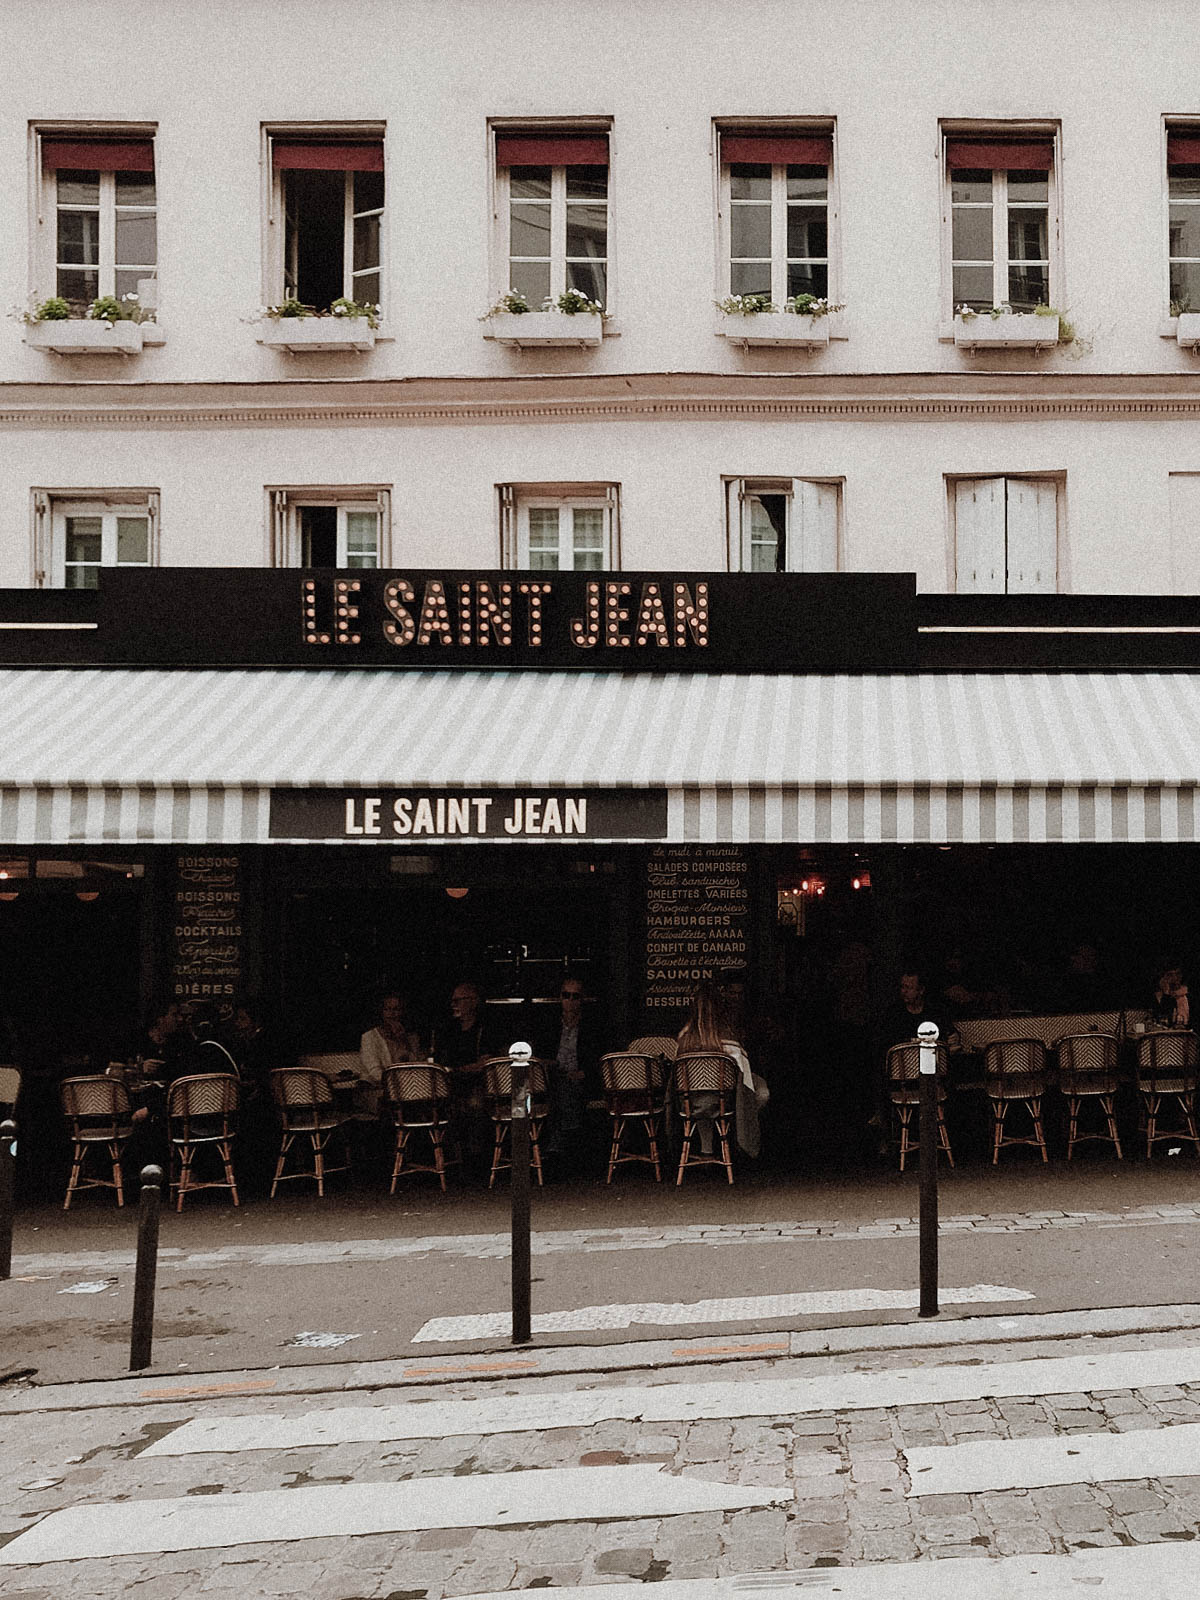 Paris France Travel Guide - French Cafe Le Saint Jean / RG Daily Blog